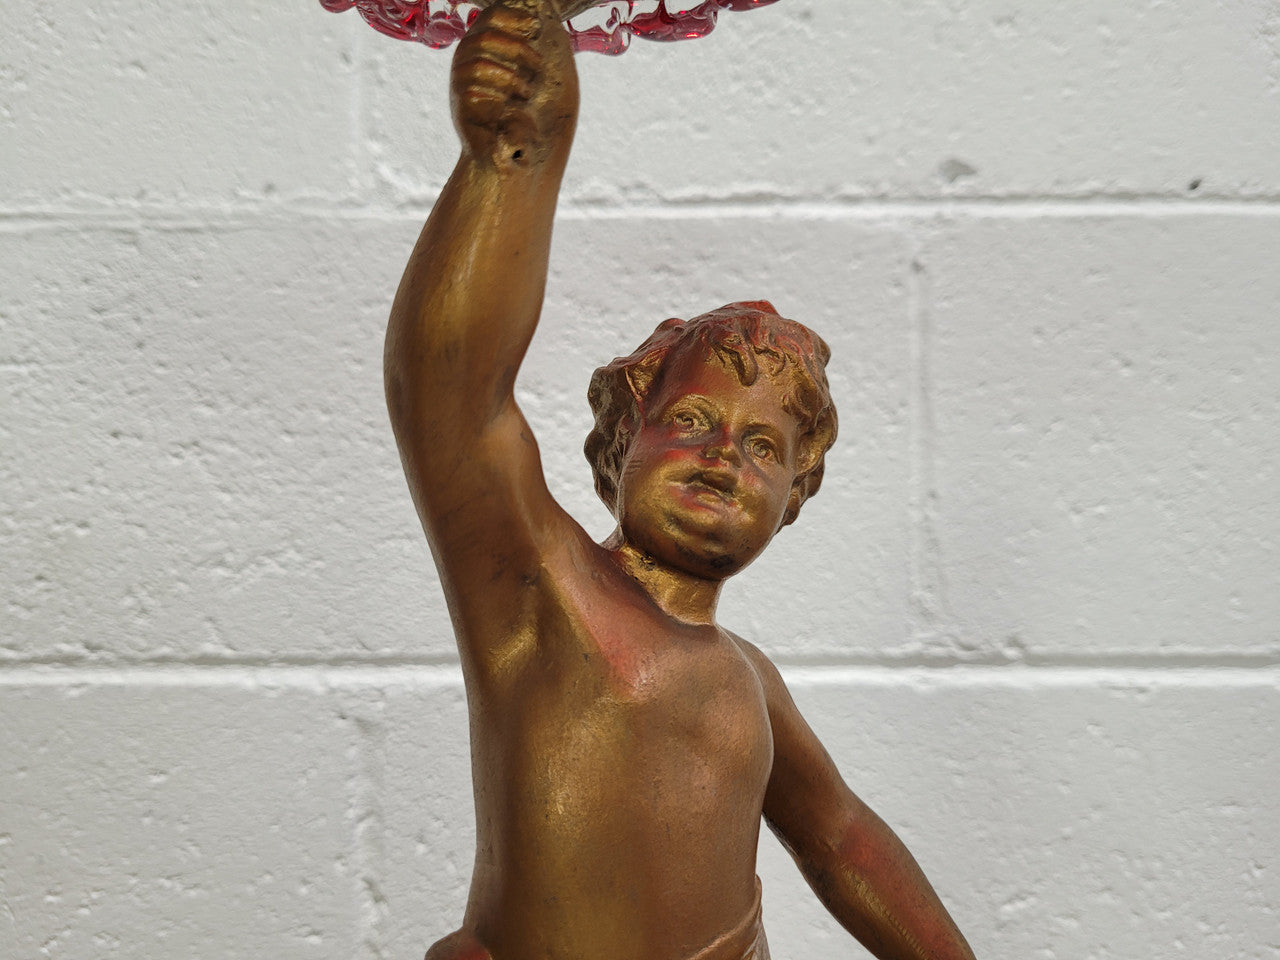 Late Victorian spelter table centerpiece/comfort featuring putti holding ruby glass bowl. In good original condition with no damage to the glass.